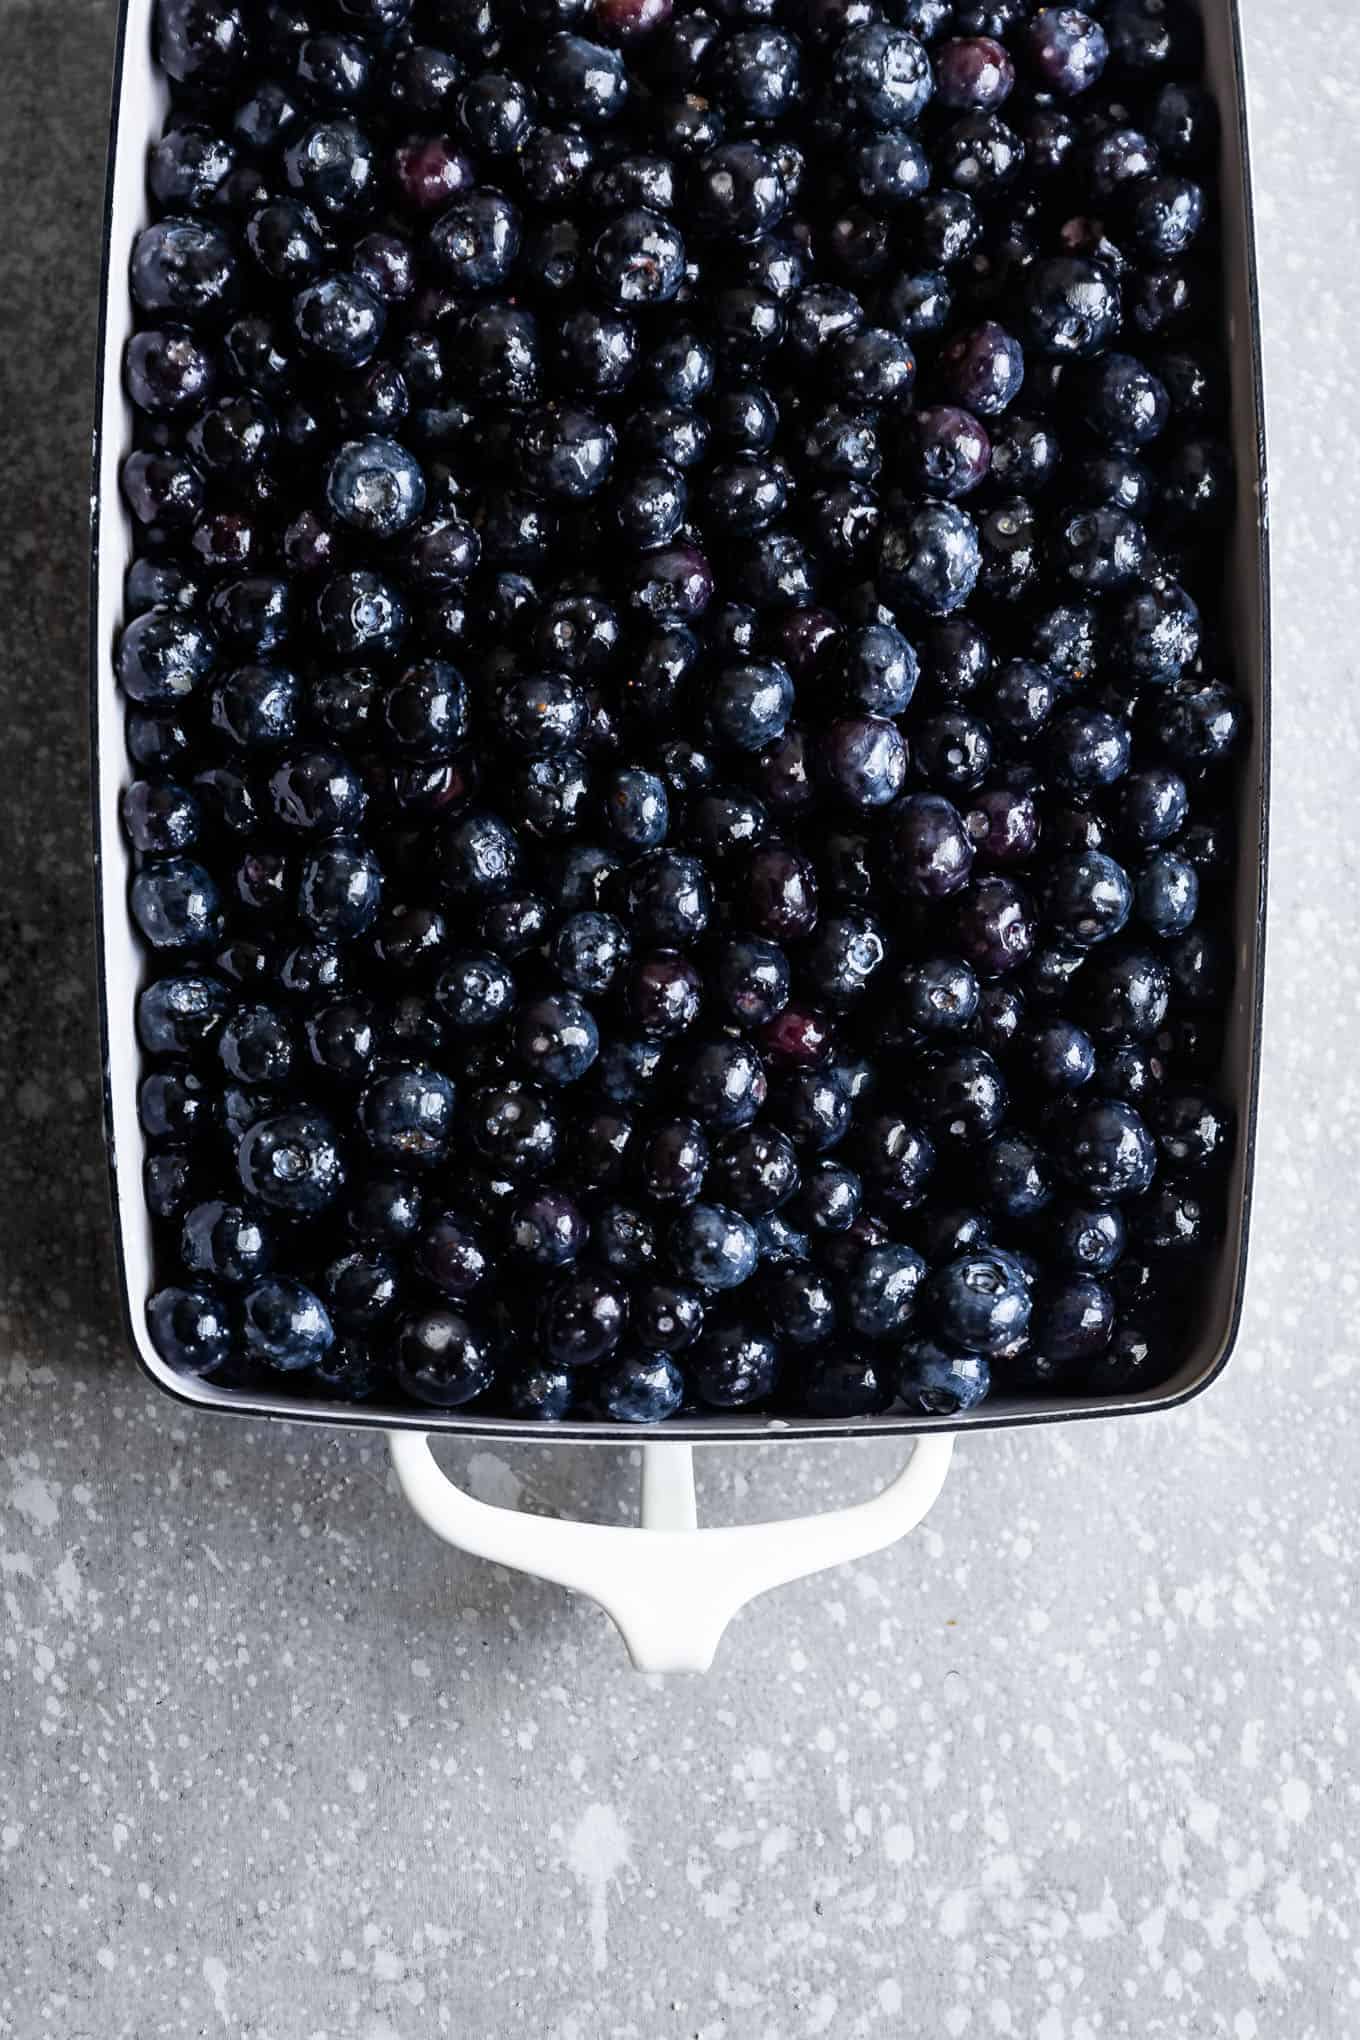 Baked Blueberry Compote